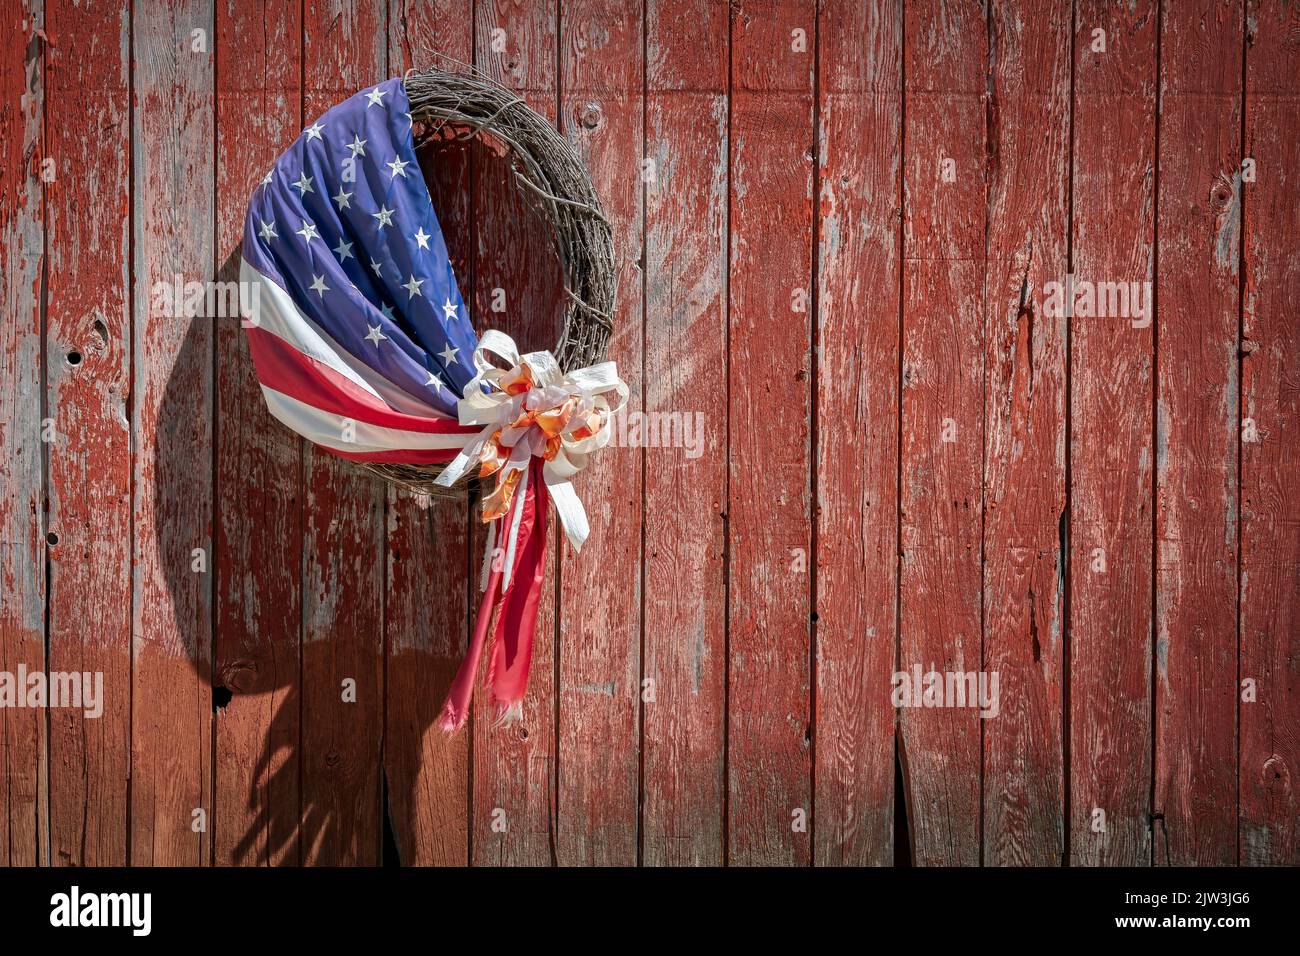 An American flag wrapped around a wreath made of sticks hangs on the side of a barn near Manitowoc, Wisconsin. Stock Photo